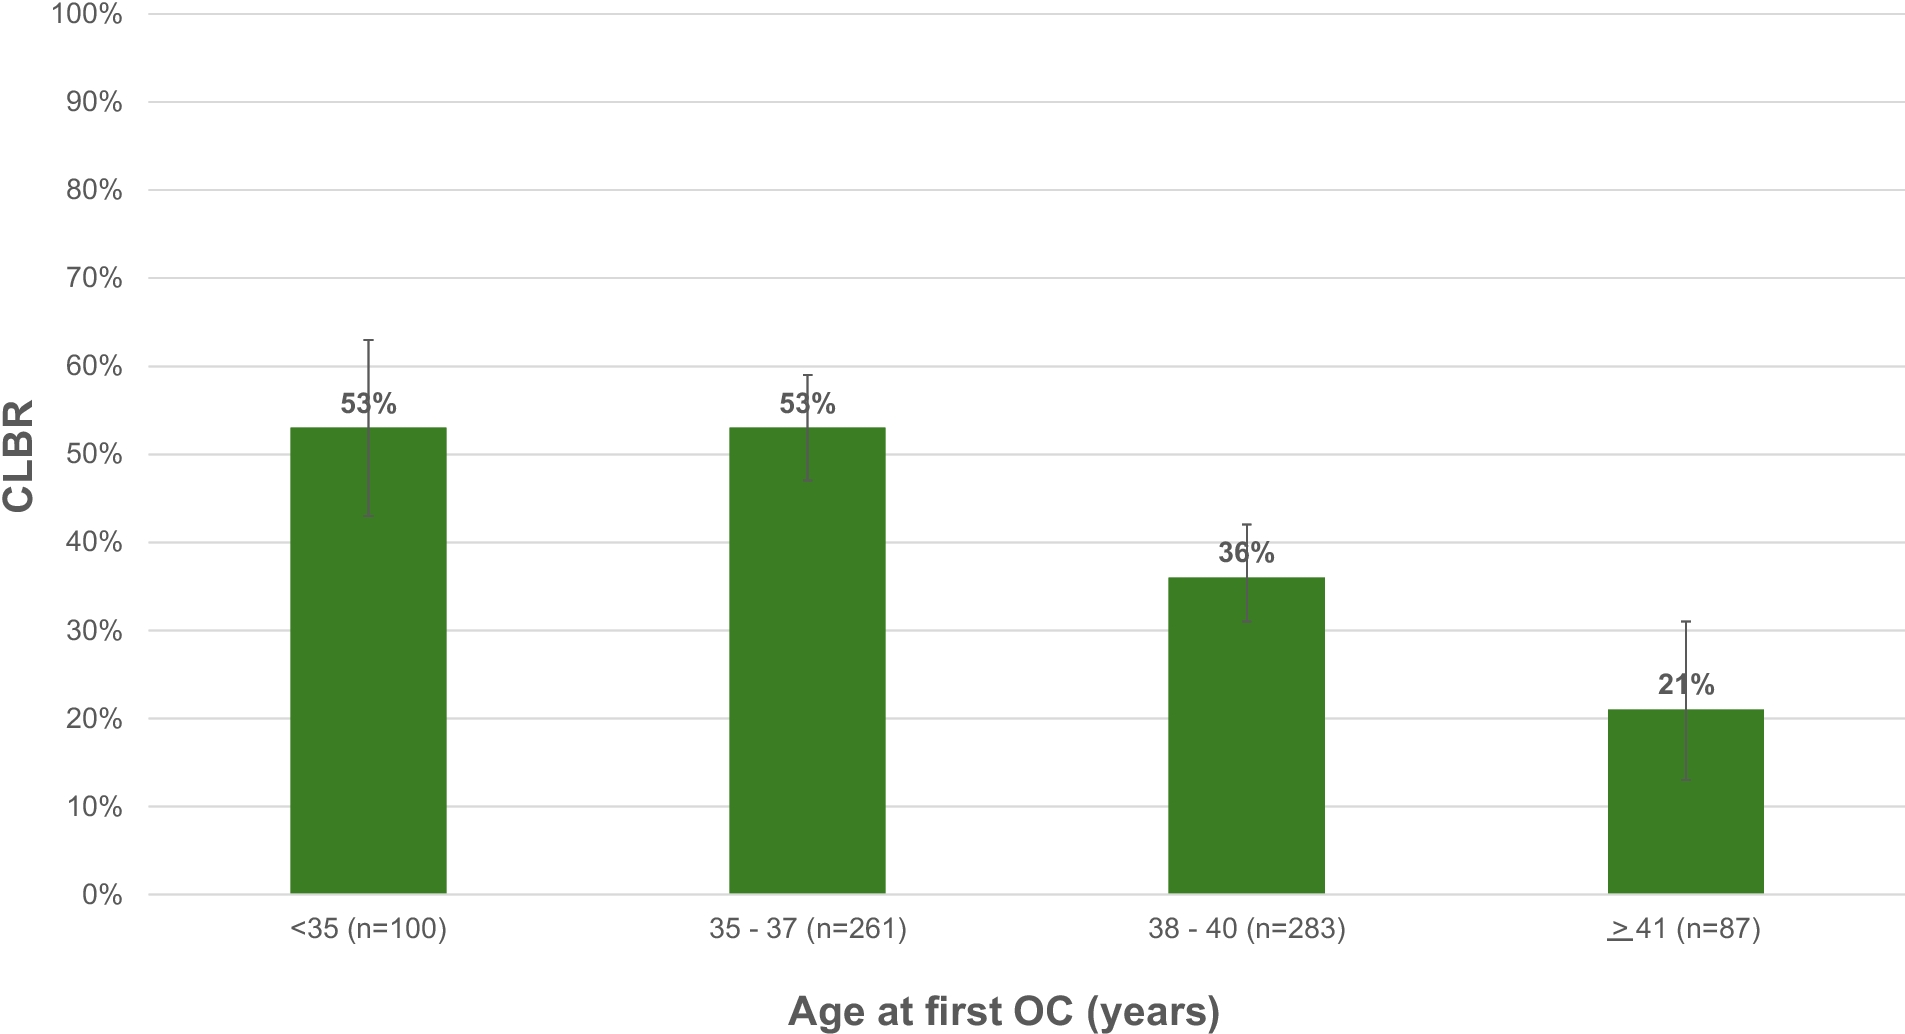 The effects of age, mature oocyte number, and cycle number on cumulative live birth rates after planned oocyte cryopreservation